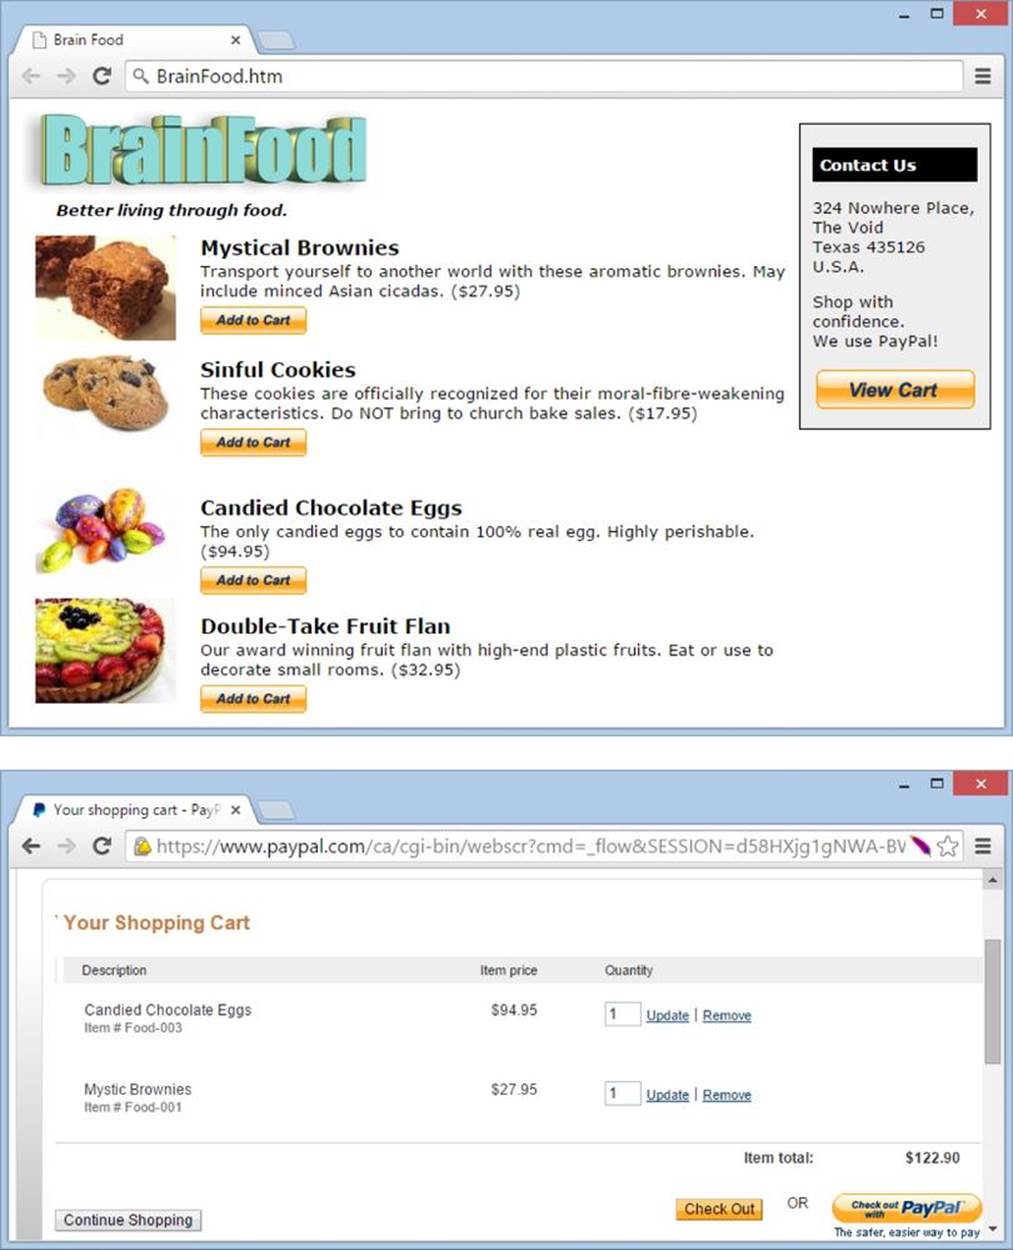 Top: Here’s the revised BrainFood page, with shopping cart buttons.Bottom: After clicking a few “Add to Cart” buttons, here’s the shopping cart page your visitors will see (in a separate window). All they need to do is click Check Out to complete a purchase